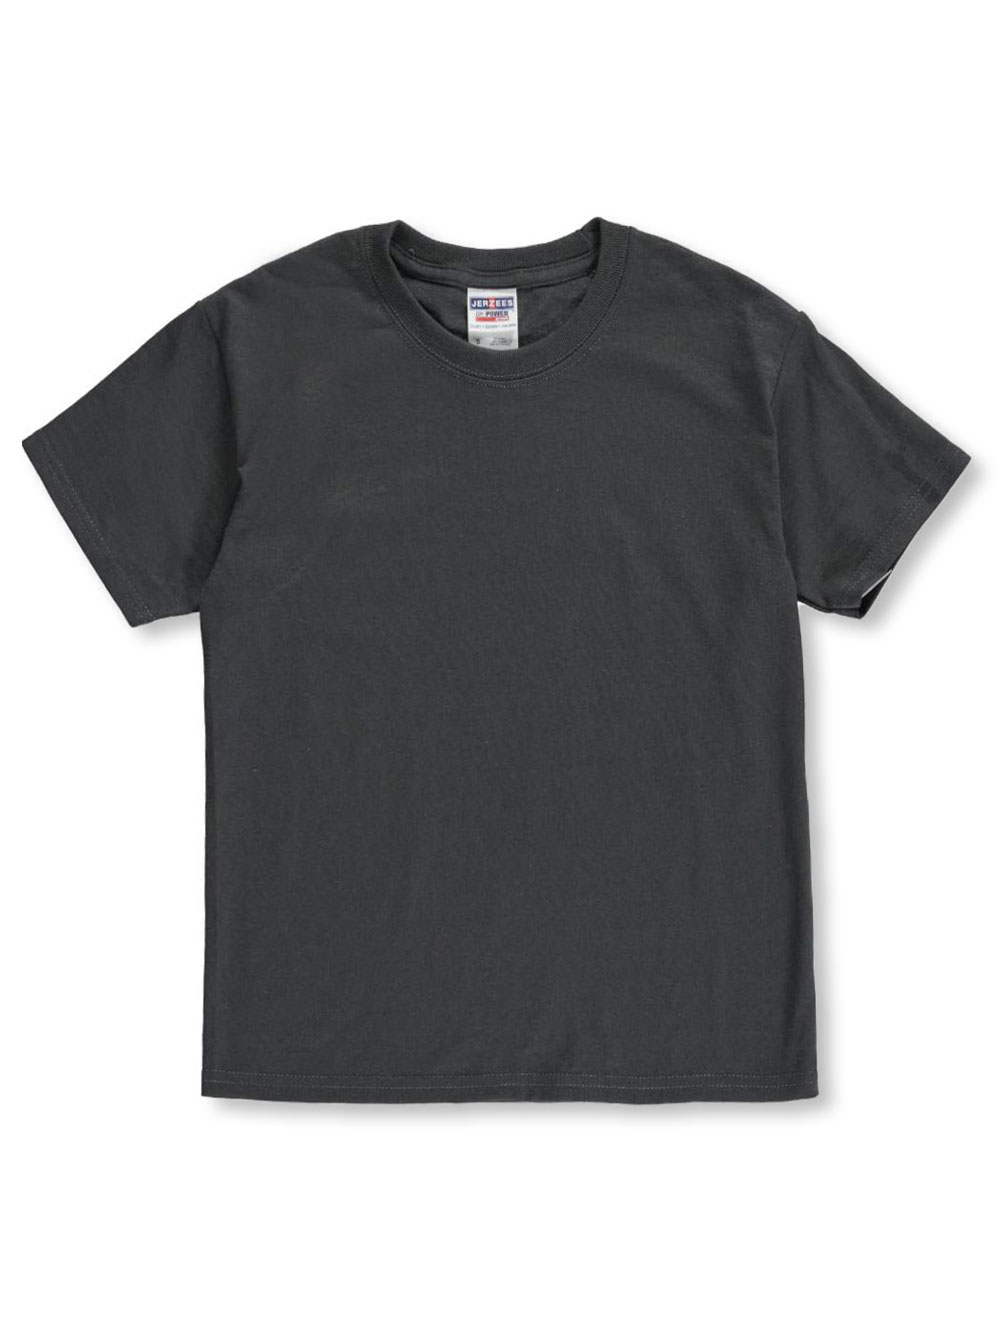 Size 18 T-Shirts for Boys